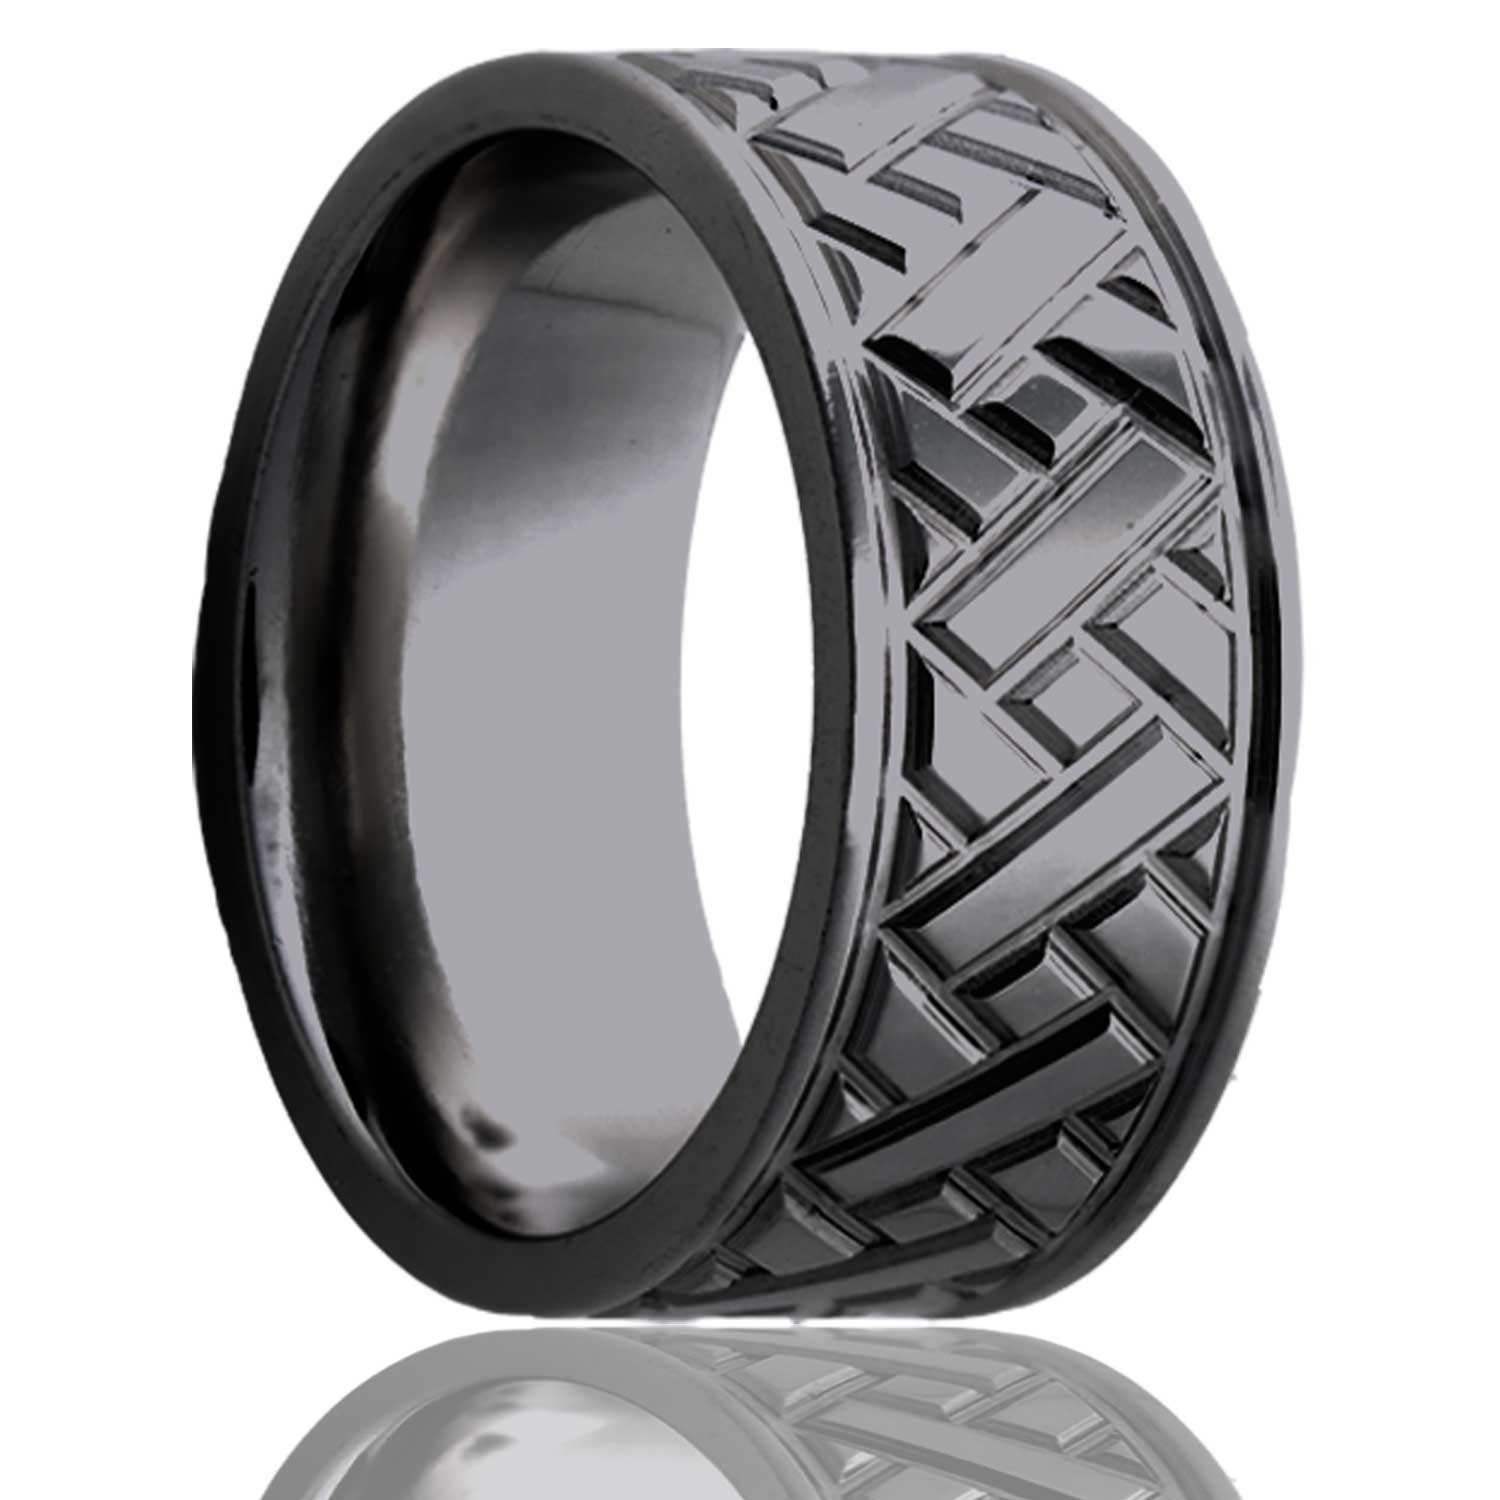 A grooved diagonal pattern zirconium men's wedding band displayed on a neutral white background.